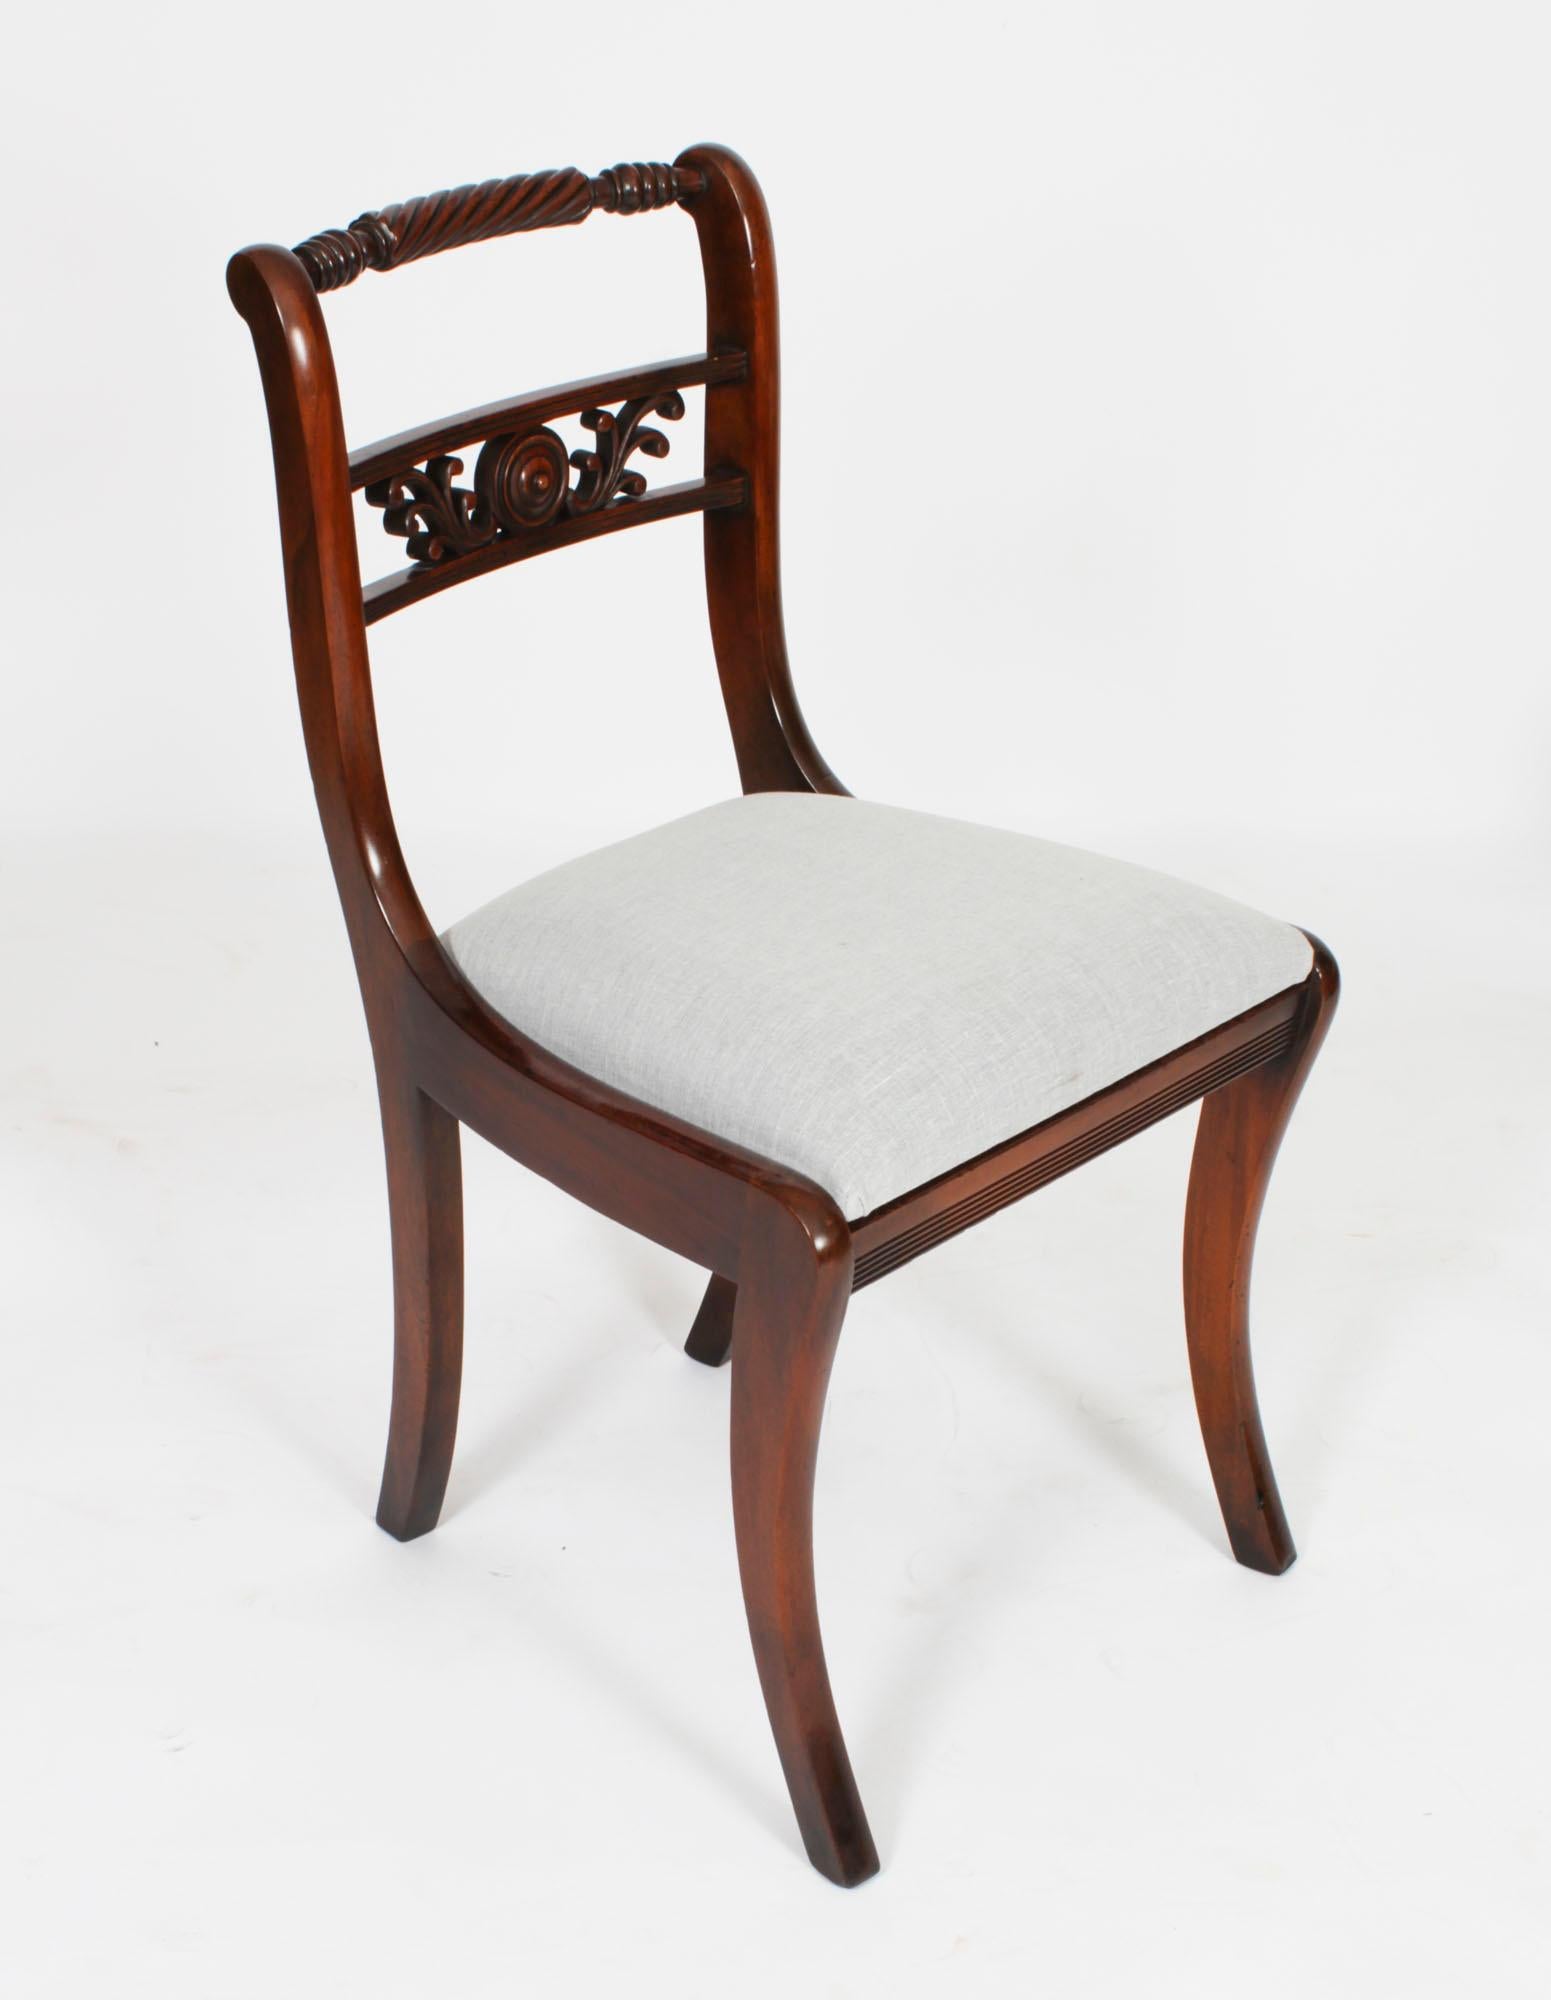 An absolutely fantastic Vintage set of twenty Regency Revival Rope Back dining chairs dating from the second half of the 20th Century.

These chairs have been masterfully crafted in beautiful solid flame mahogany throughout and the finish and